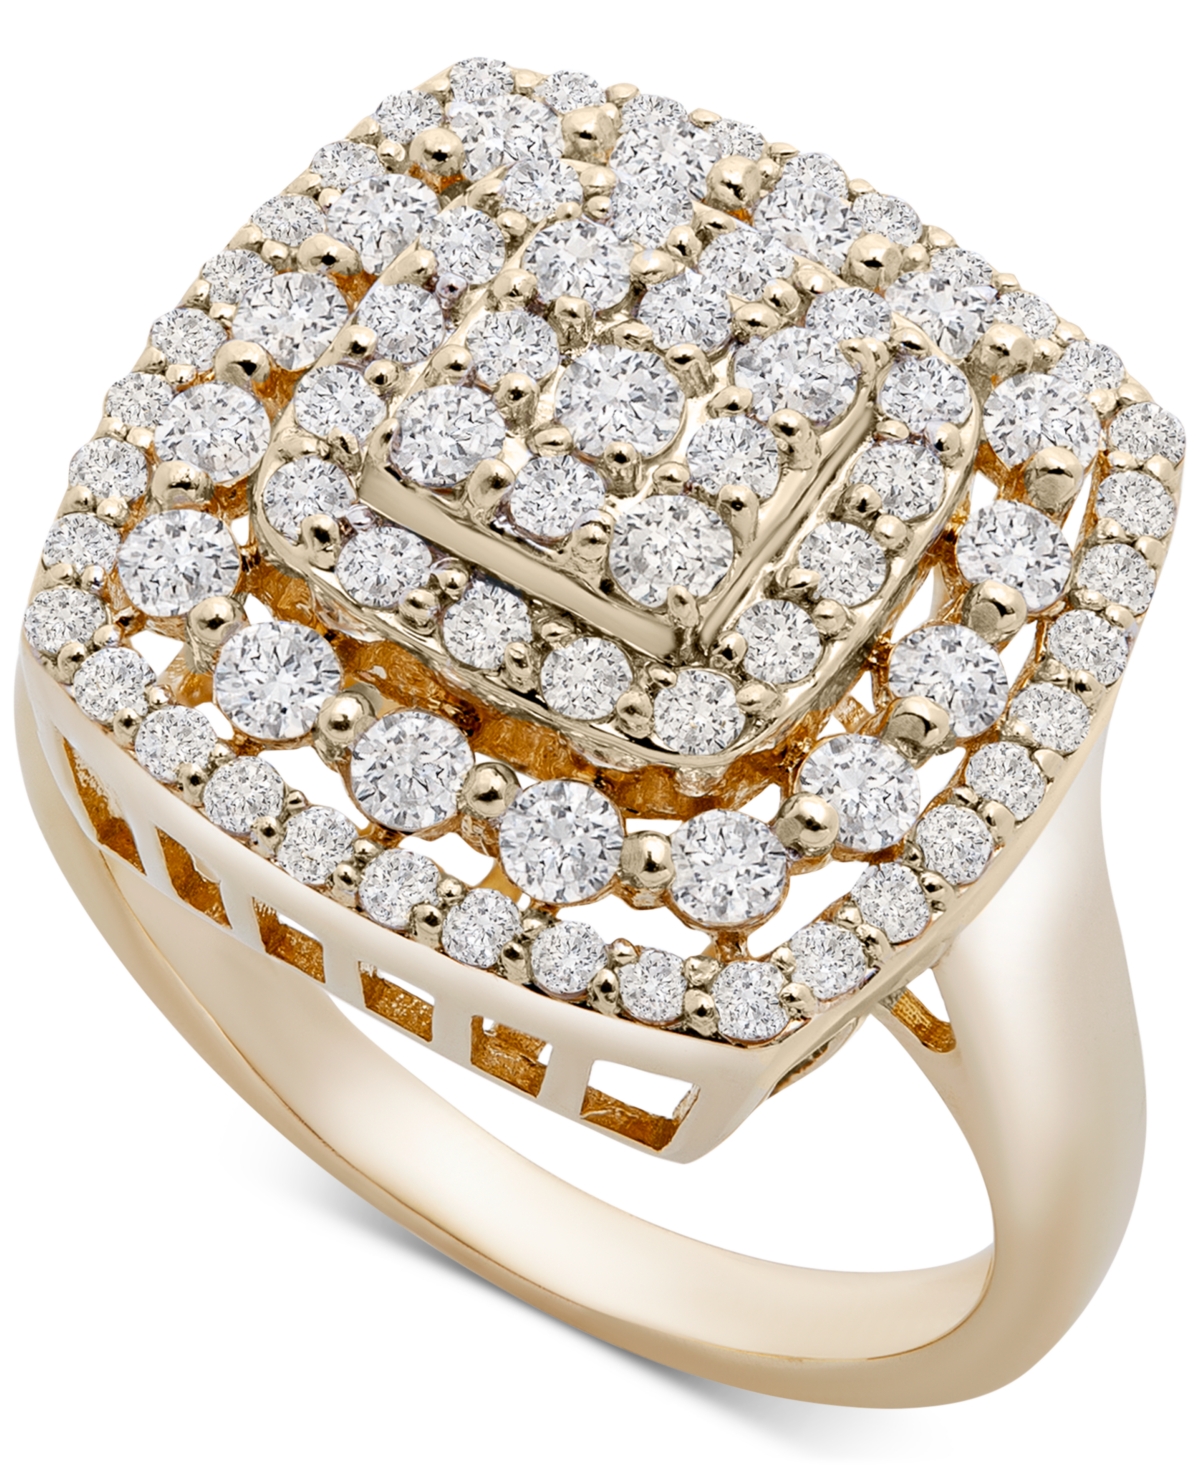 Cushion Cluster Statement Ring (1 ct. t.w.) in 14k Gold, Created for Macy's - Yellow Gold